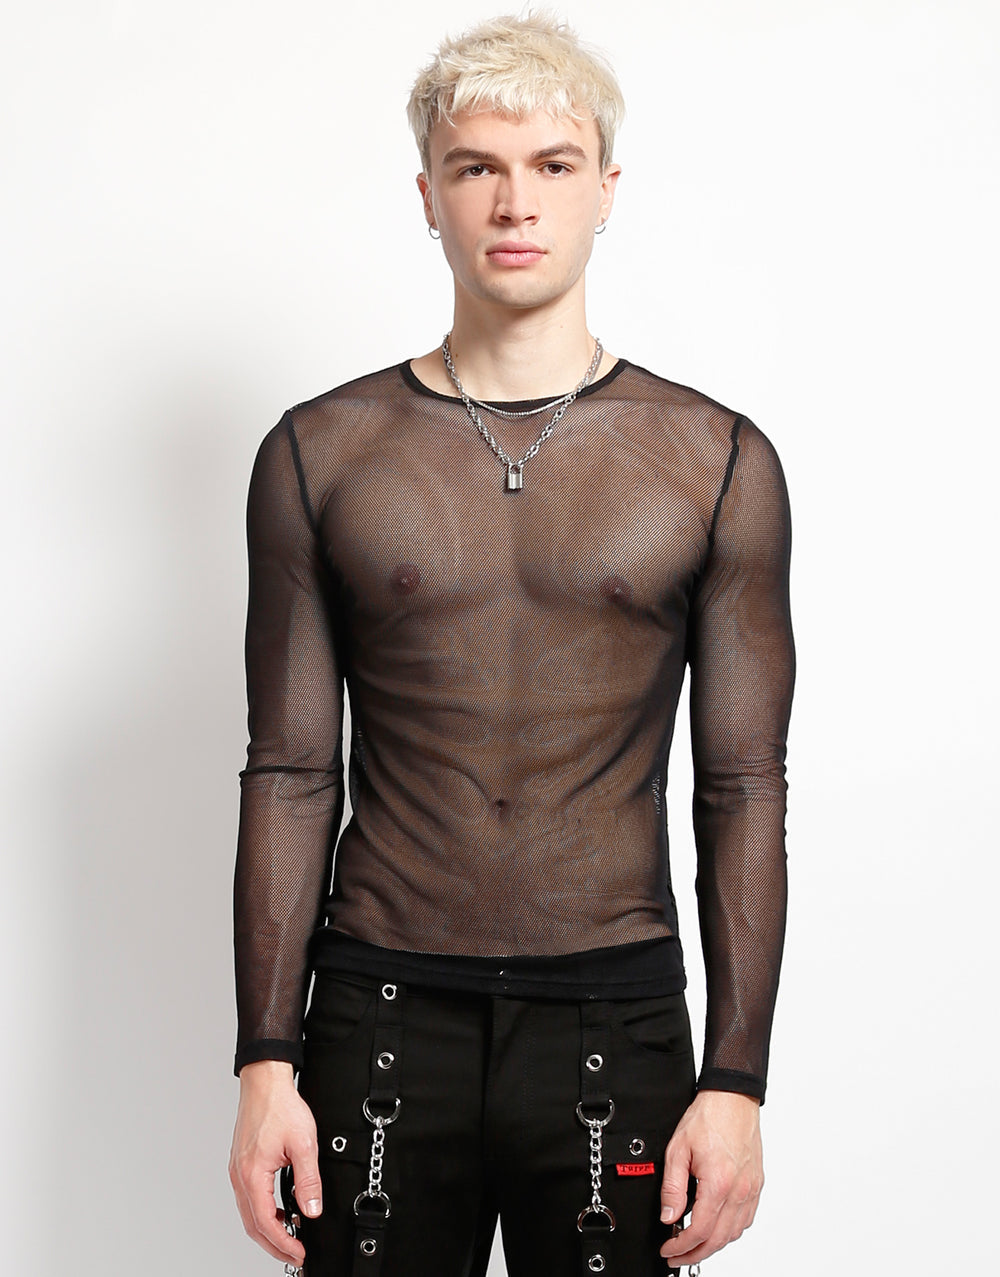 The front of the Long Sleeve Jewel Neck Fishnet Shirt on model.